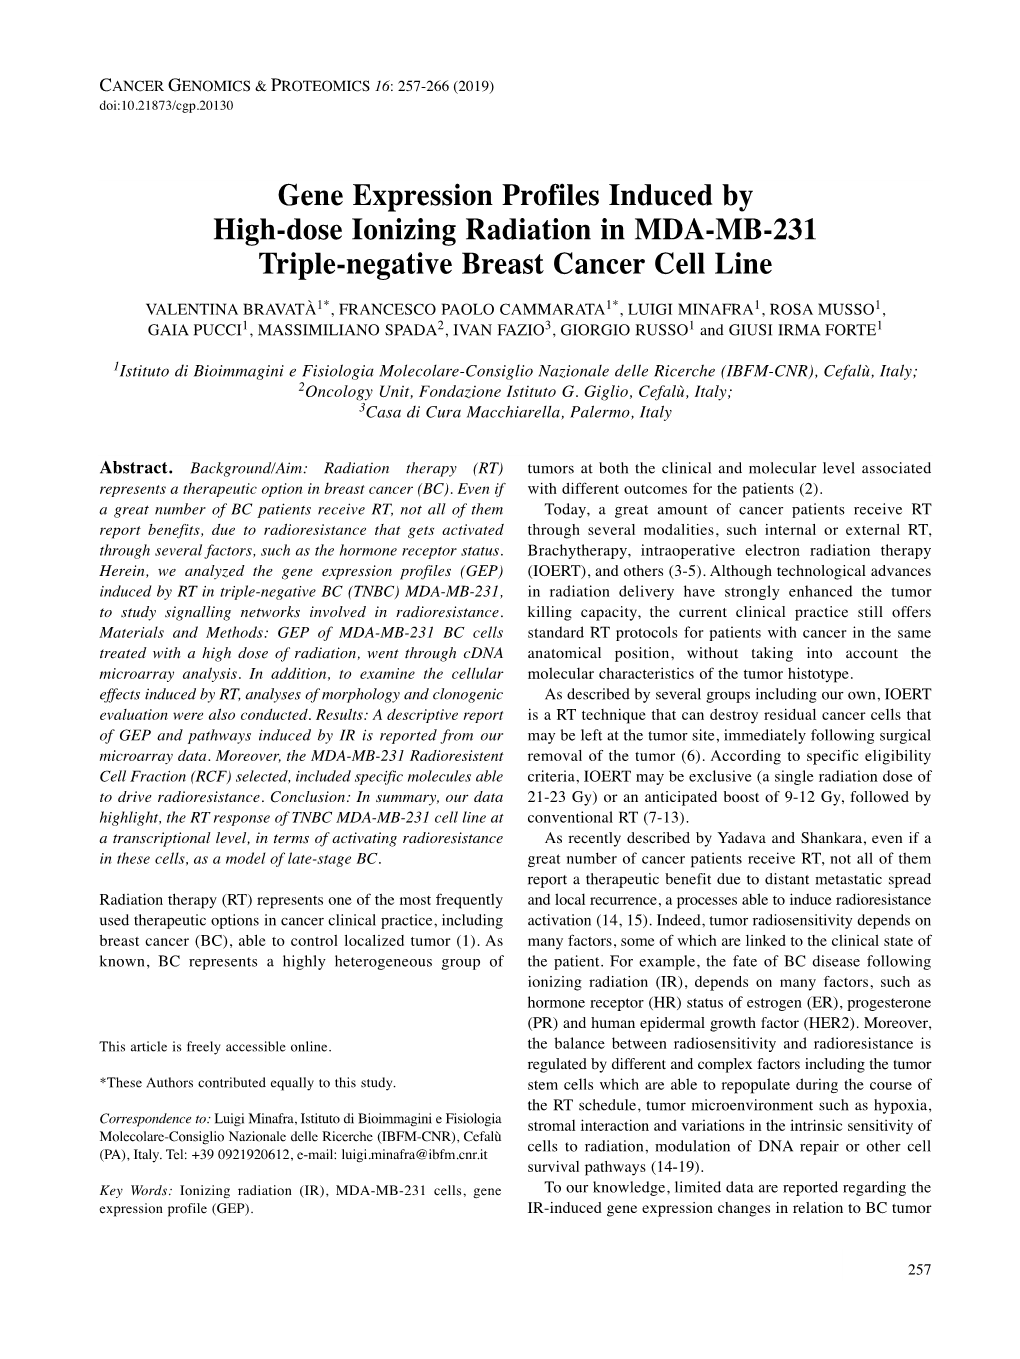 Gene Expression Profiles Induced by High-Dose Ionizing Radiation In